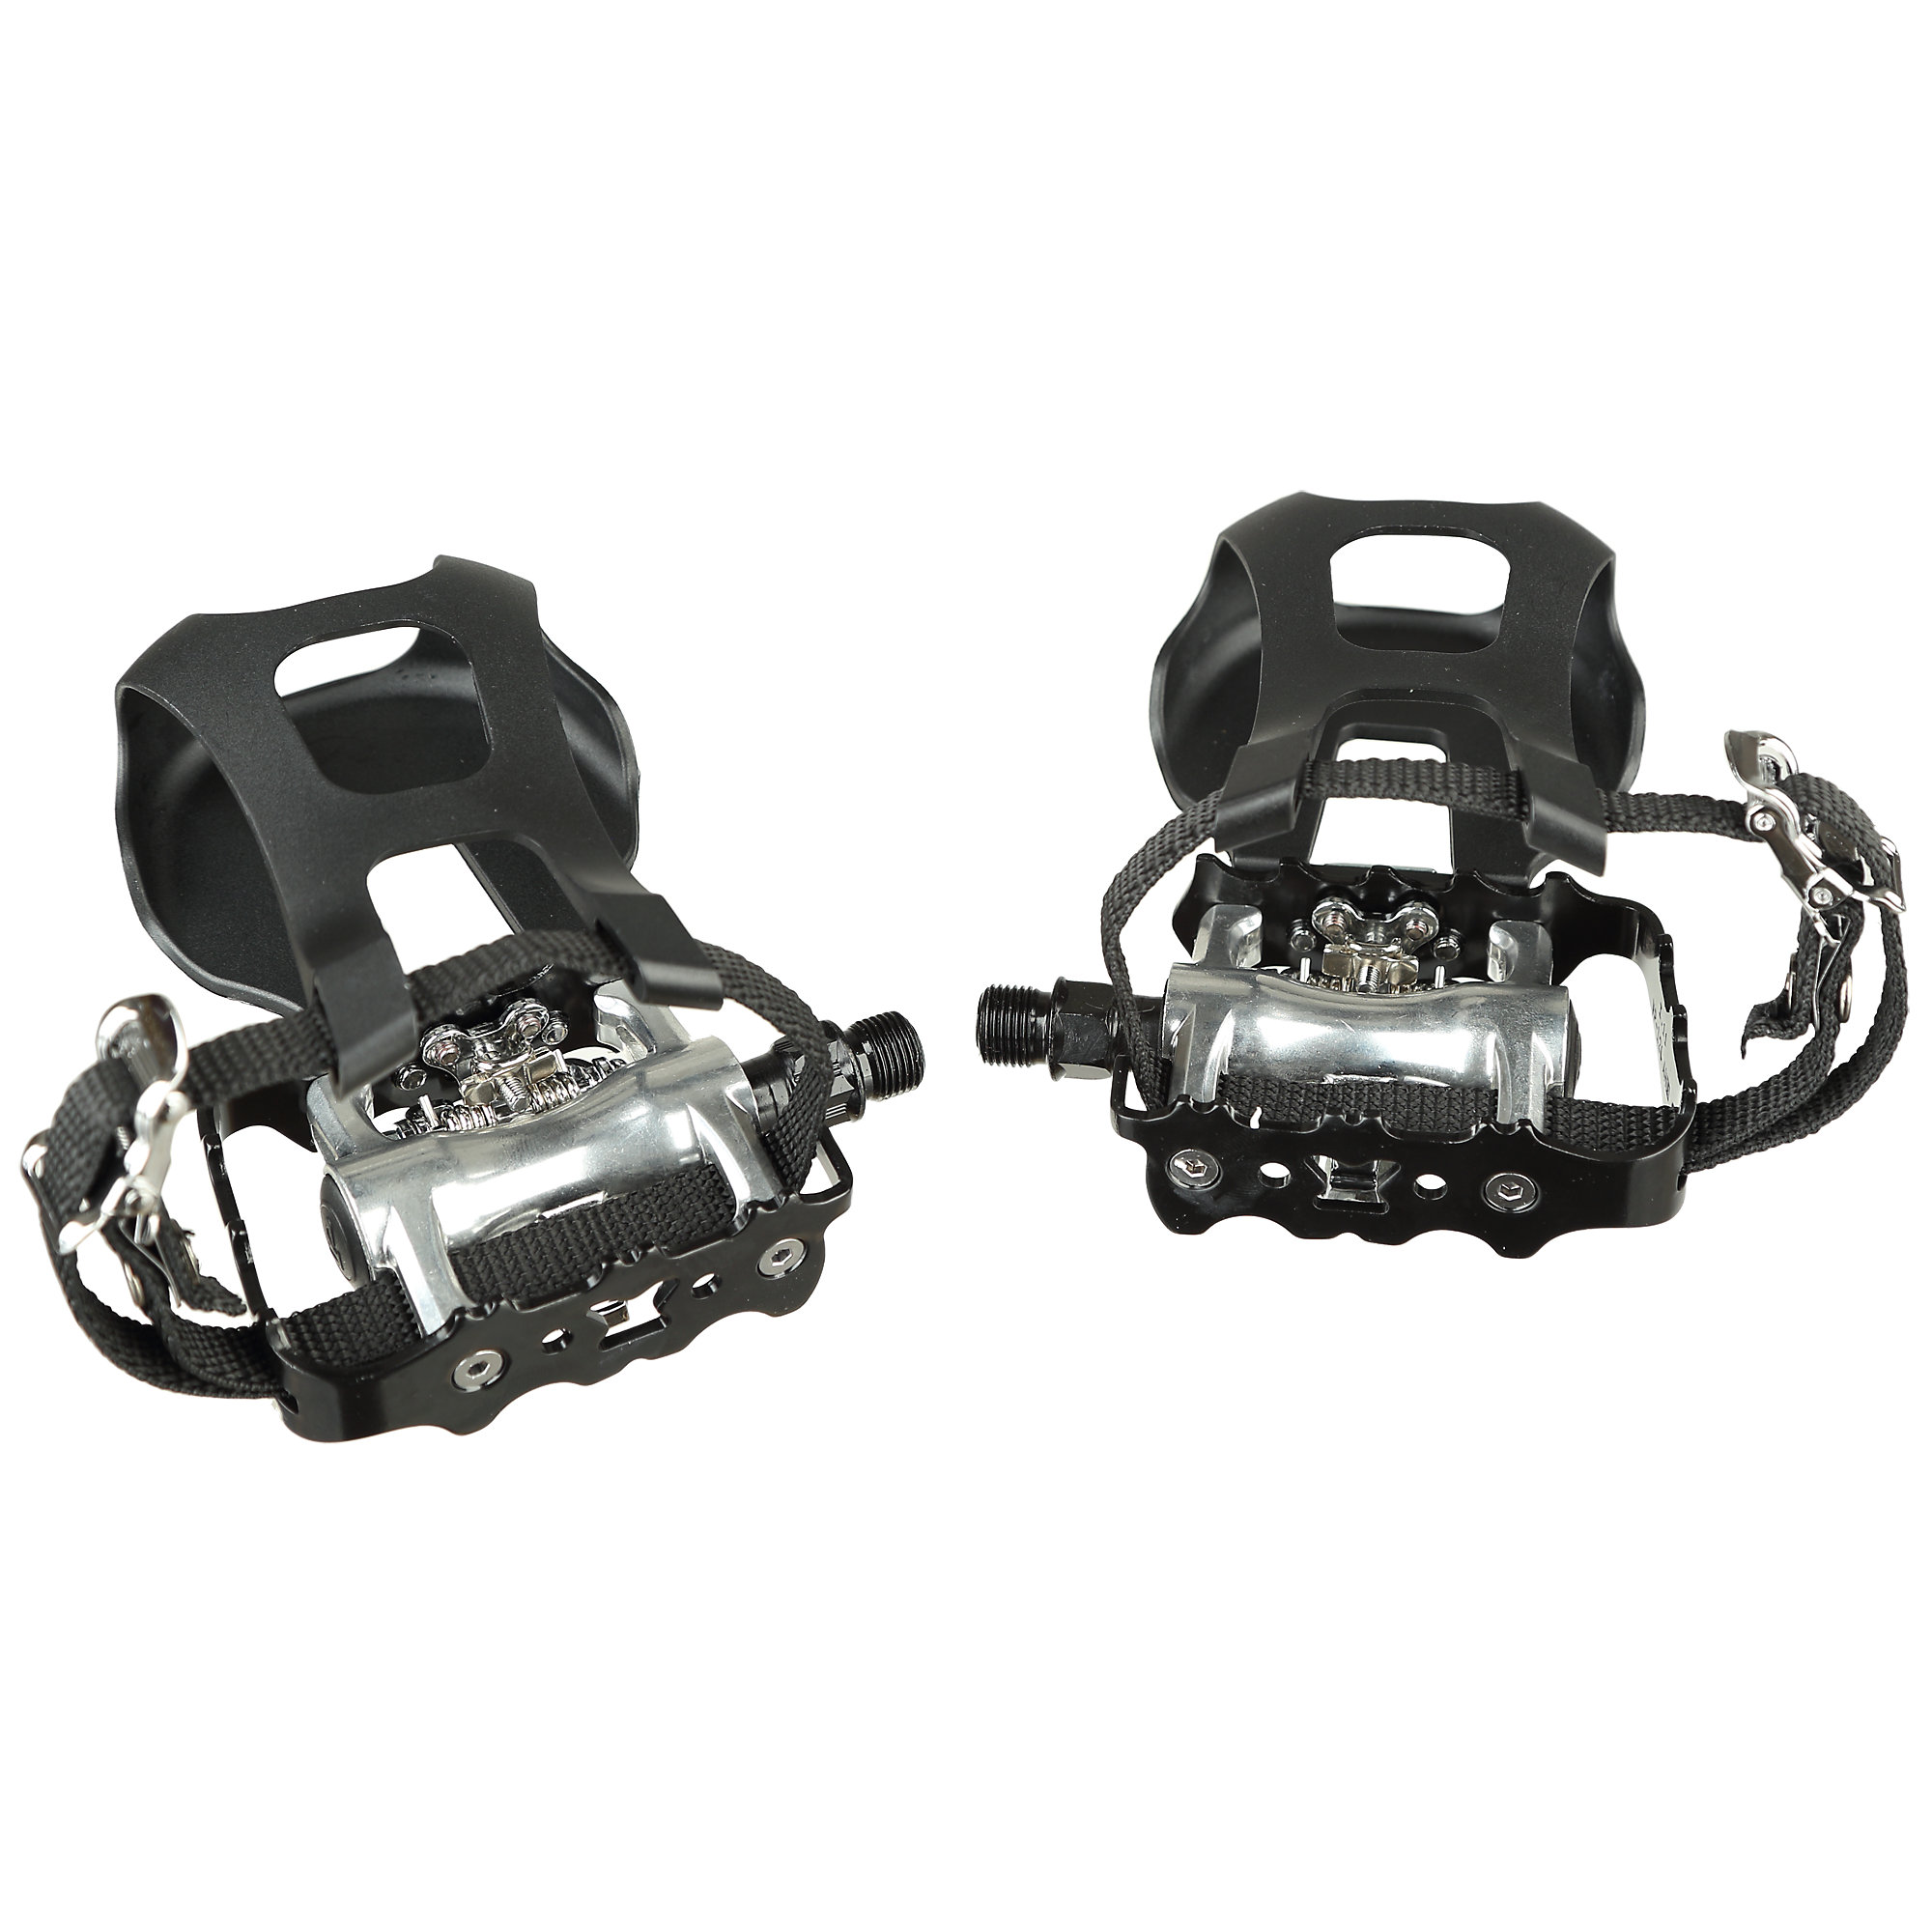 Bike Pedals, *SPD* Pedal Set with Toe Cages, Straps, and Shoe Hardware, 9/16"